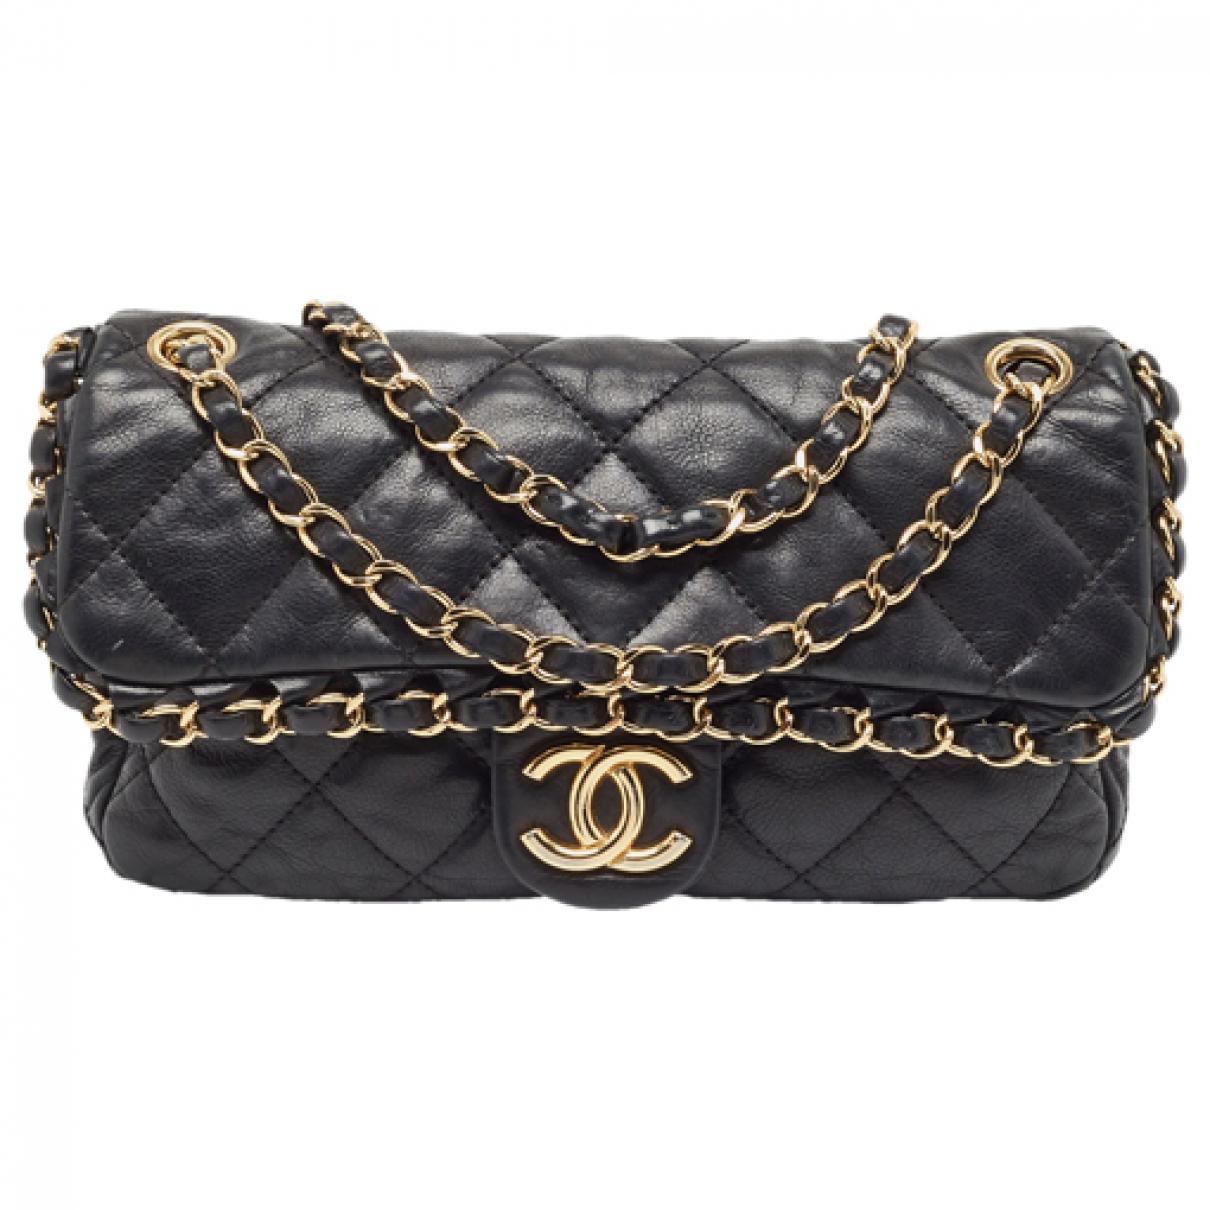 Chanel - Authenticated Timeless/Classique Handbag - Cloth Blue for Women, Very Good Condition